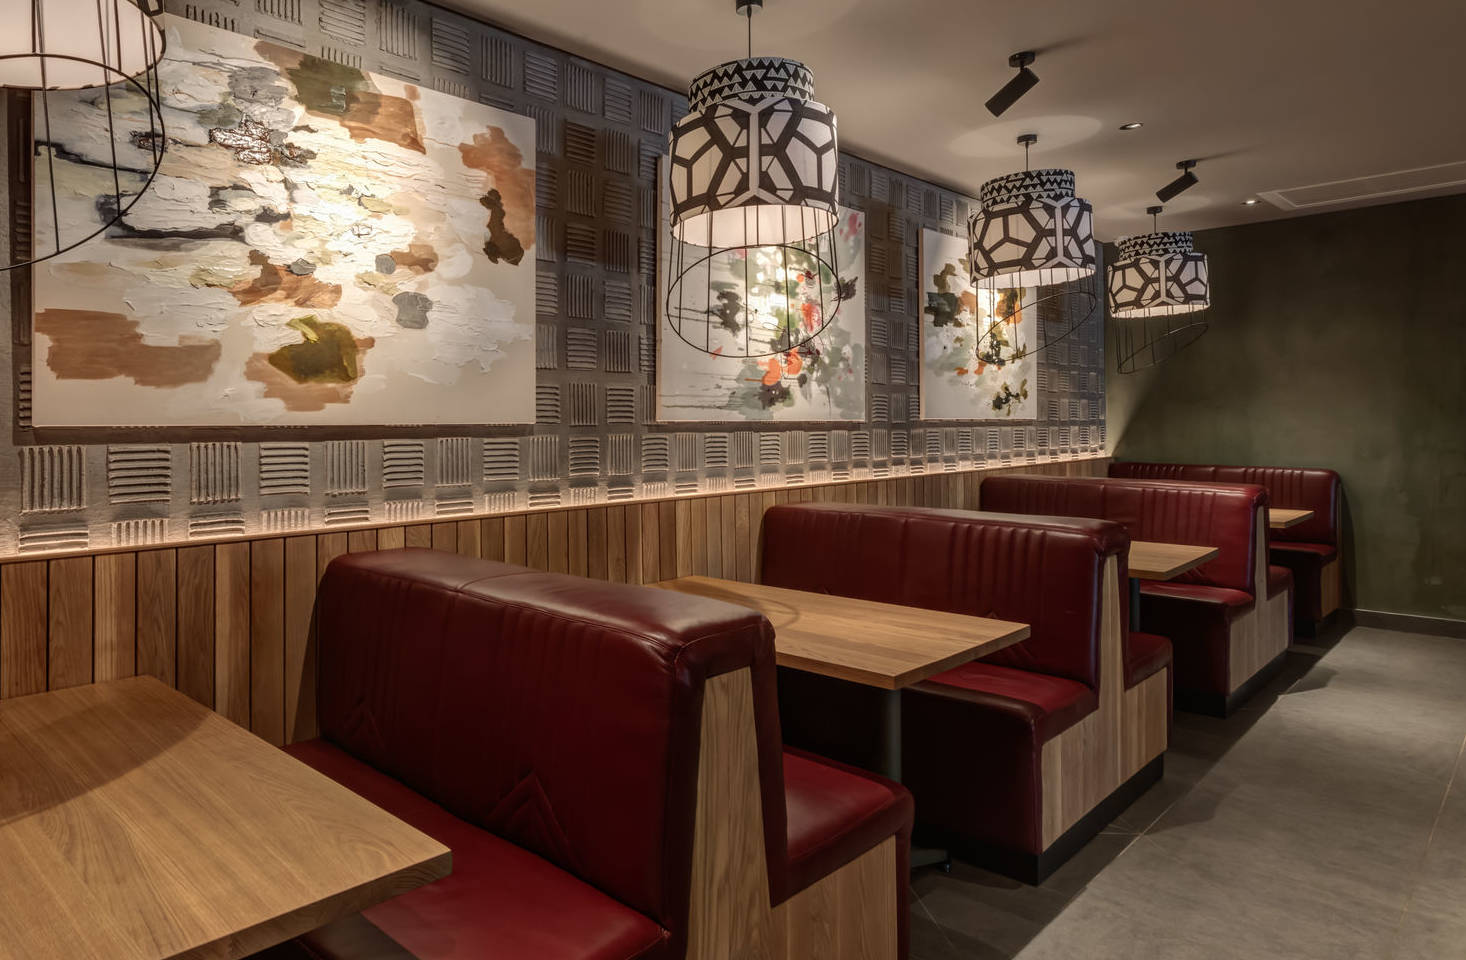 Nando's Hillcrest Mall - by Earthworld Architects